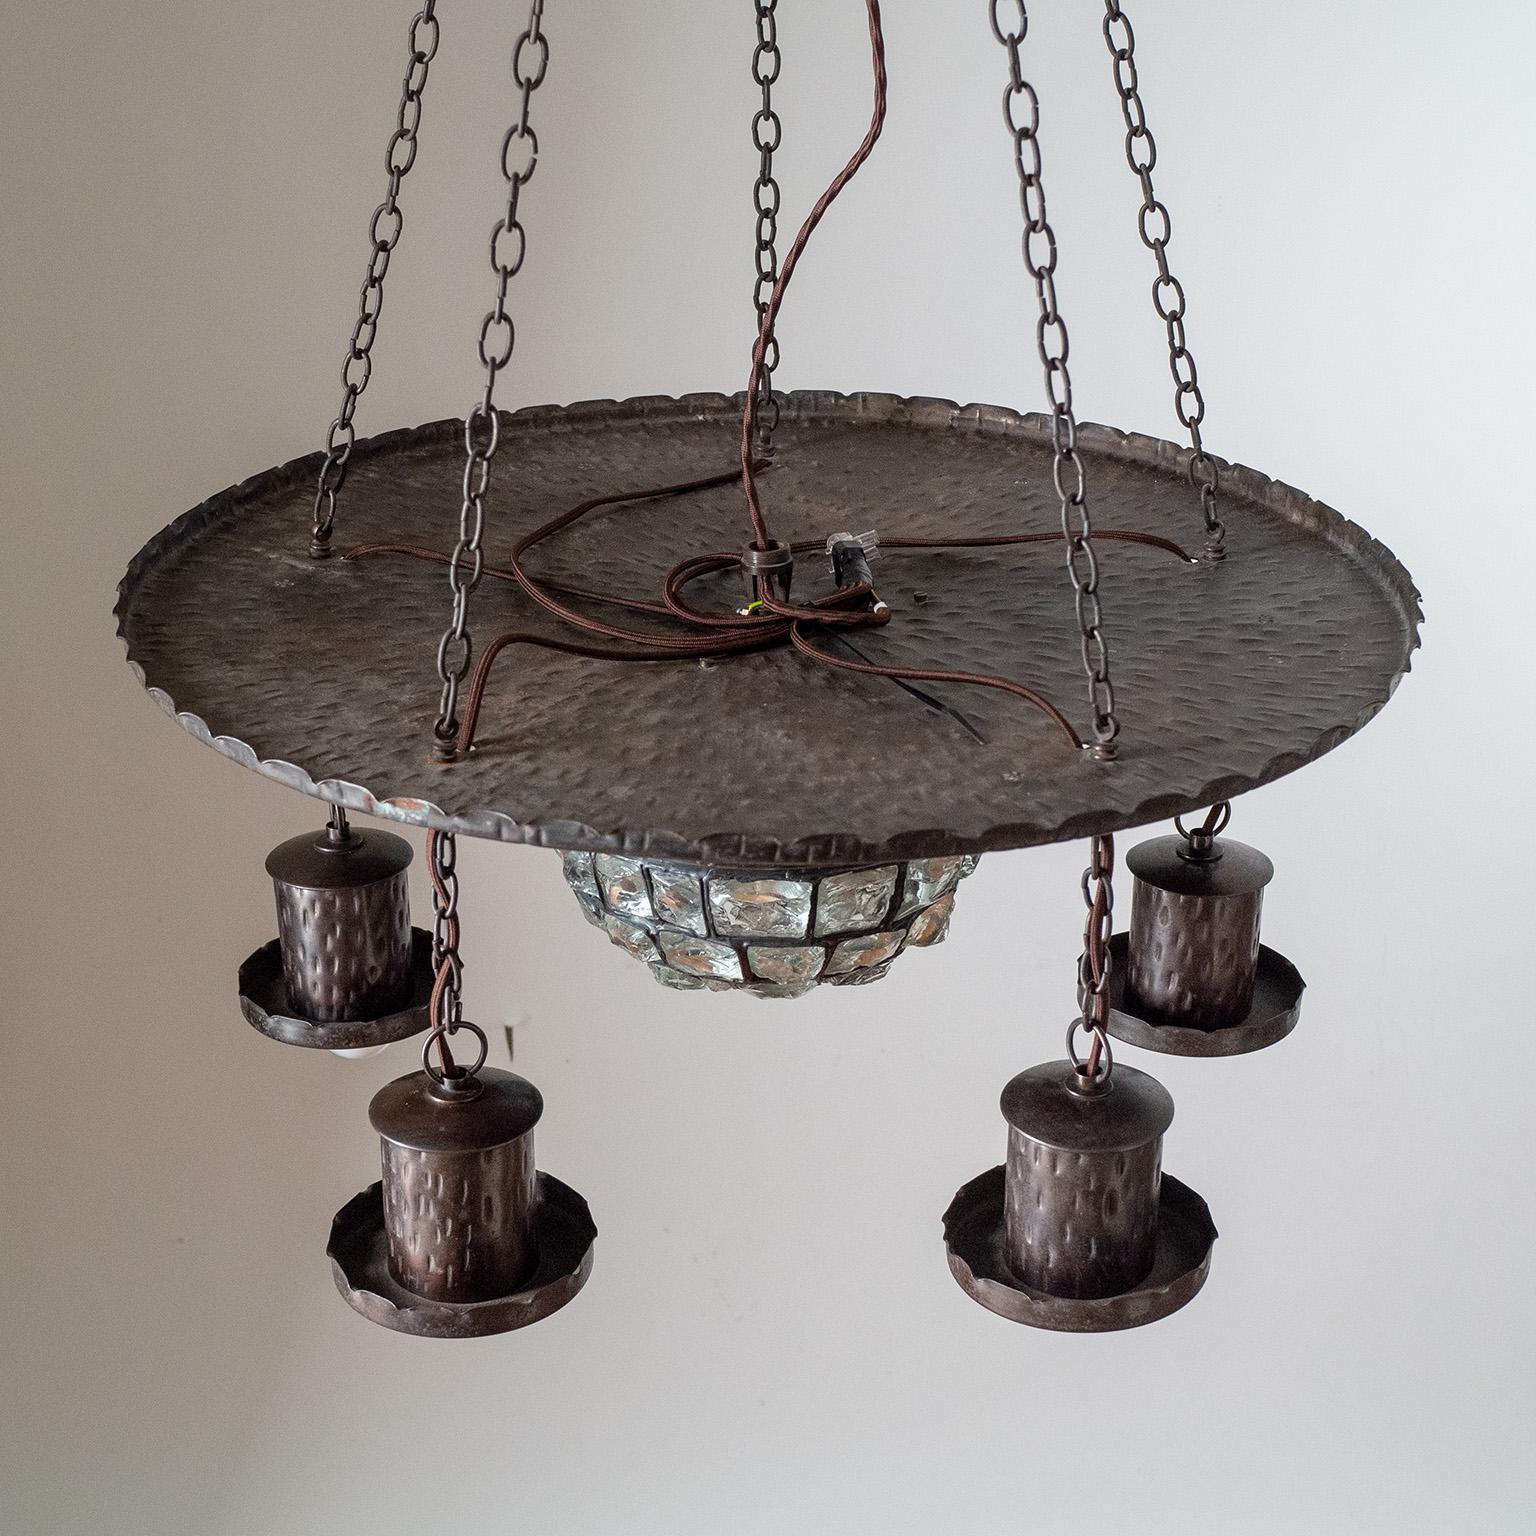 Early 20th Century Wrought Iron Suspension Chandelier, circa 1920 For Sale